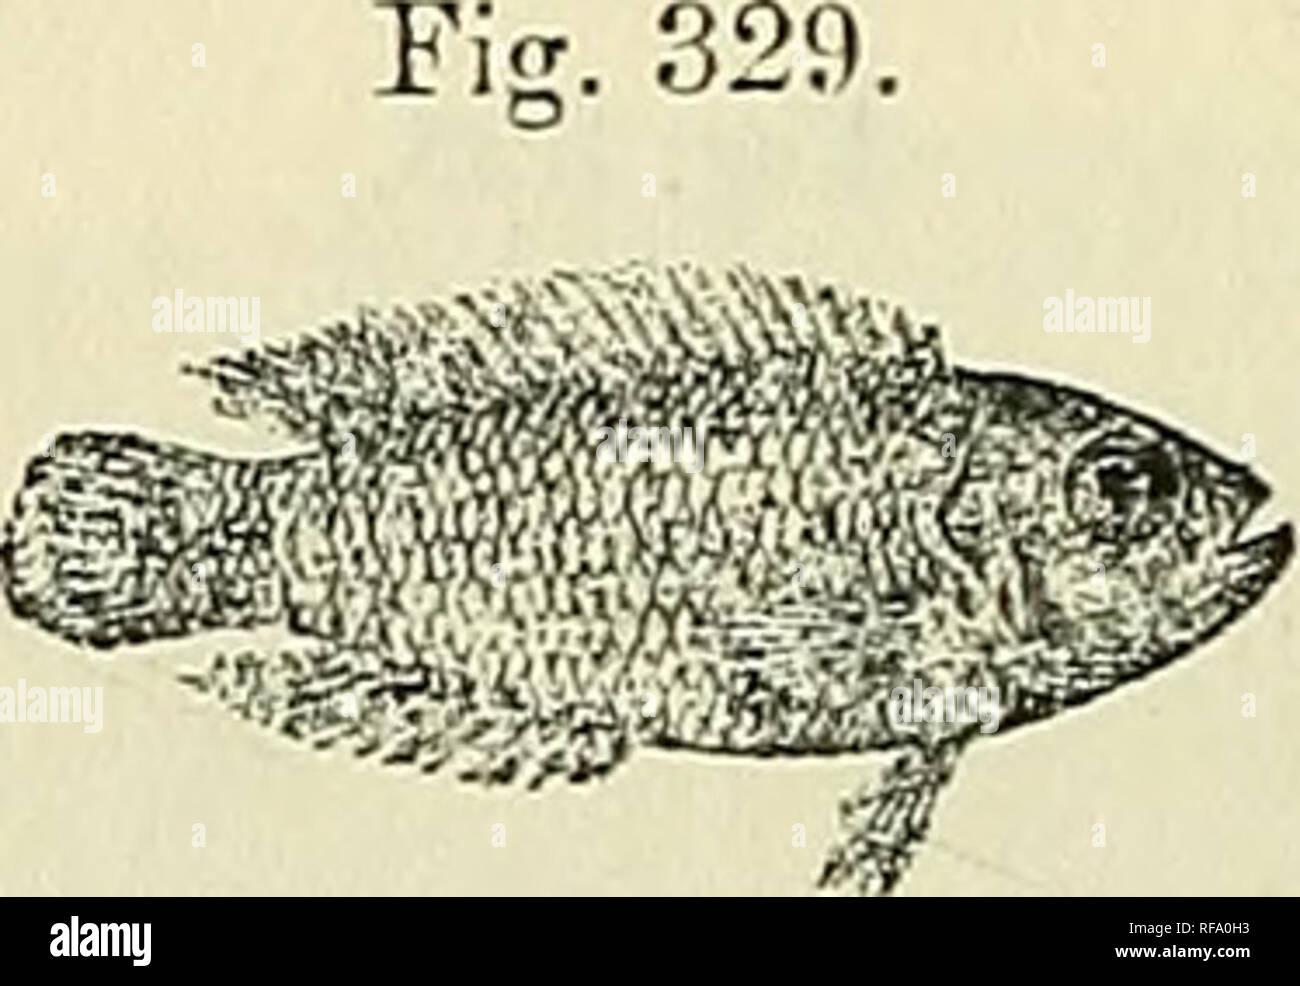 . Catalogue of the fresh-water fishes of Africa in the British Museum (Natural History). British Museum (Natural History); Fishes; Freshwater animals. 478 CICHLID.E. 20. LAMPROLOGUS BRBVIS. Bouleng. Ann. Mus. Congo, Zool. i. p. 115, pi. xliv. fig. 2 (1899), and Poiss. Bass. Congo, p. 405 (1901) ; Pellegr. Mem. Soc. Zool. France, xvi. 1904, p. 294; Bouleng. Tr. Zool. Soc. xvii. 190G, p. 561. Depth of body 2|- to 3 times in total length, length of head 3 times. Head twice as long as broad; snout as long as or shorter than eye, which is 2| to 3 times in length of head and equals interorbital widt Stock Photo